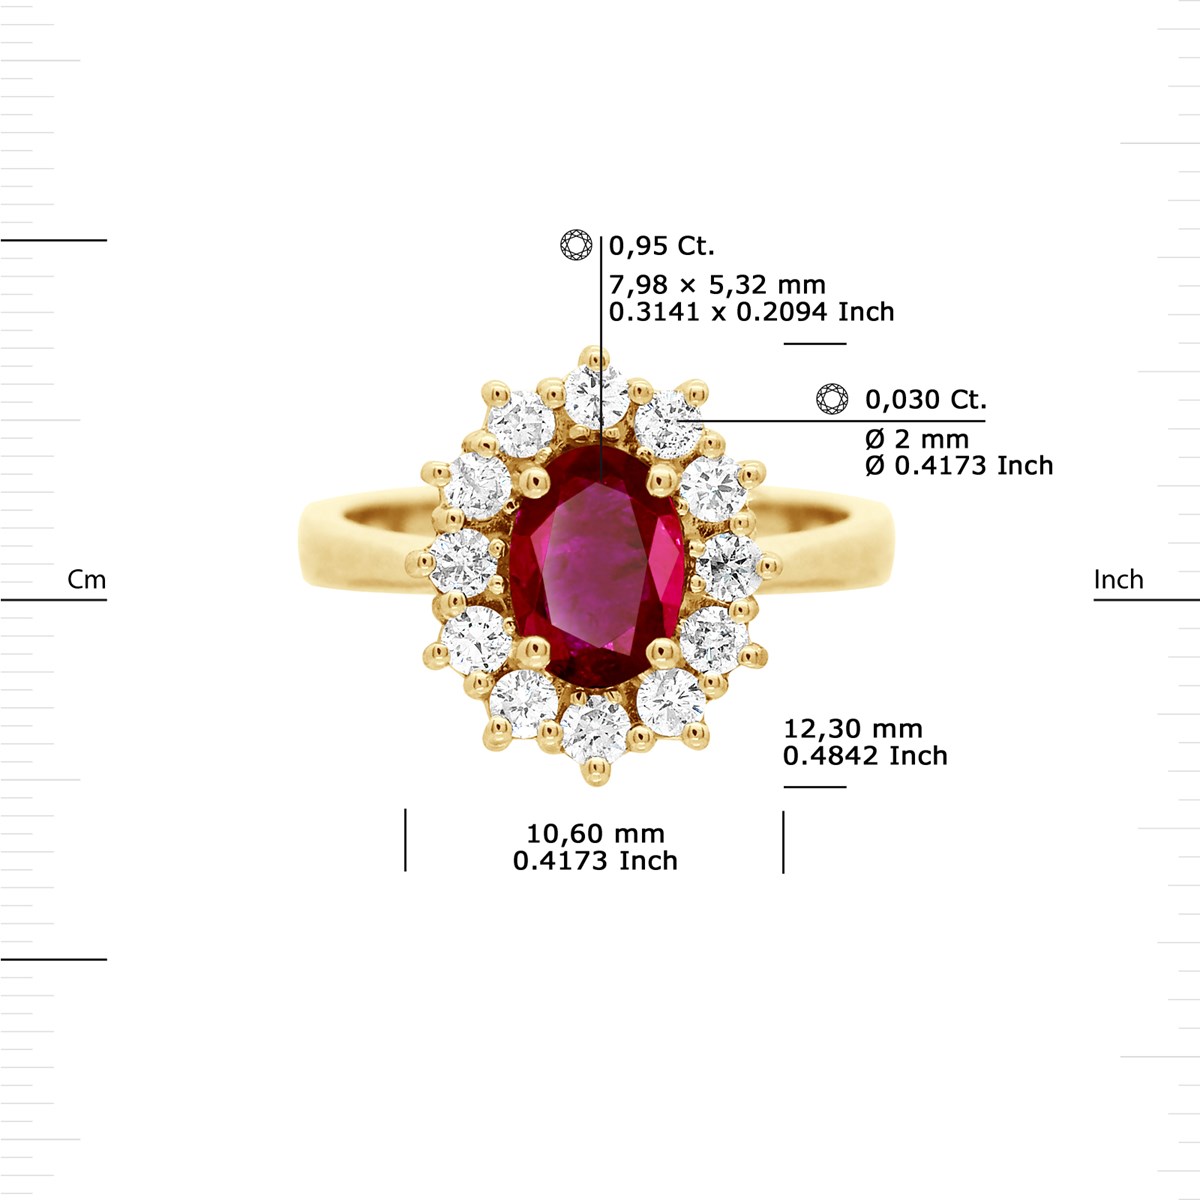 Bague Marquise RUBIS 0,95 Cts Diamants 0,36 Cts Or Jaune 18 Carats - vue 3